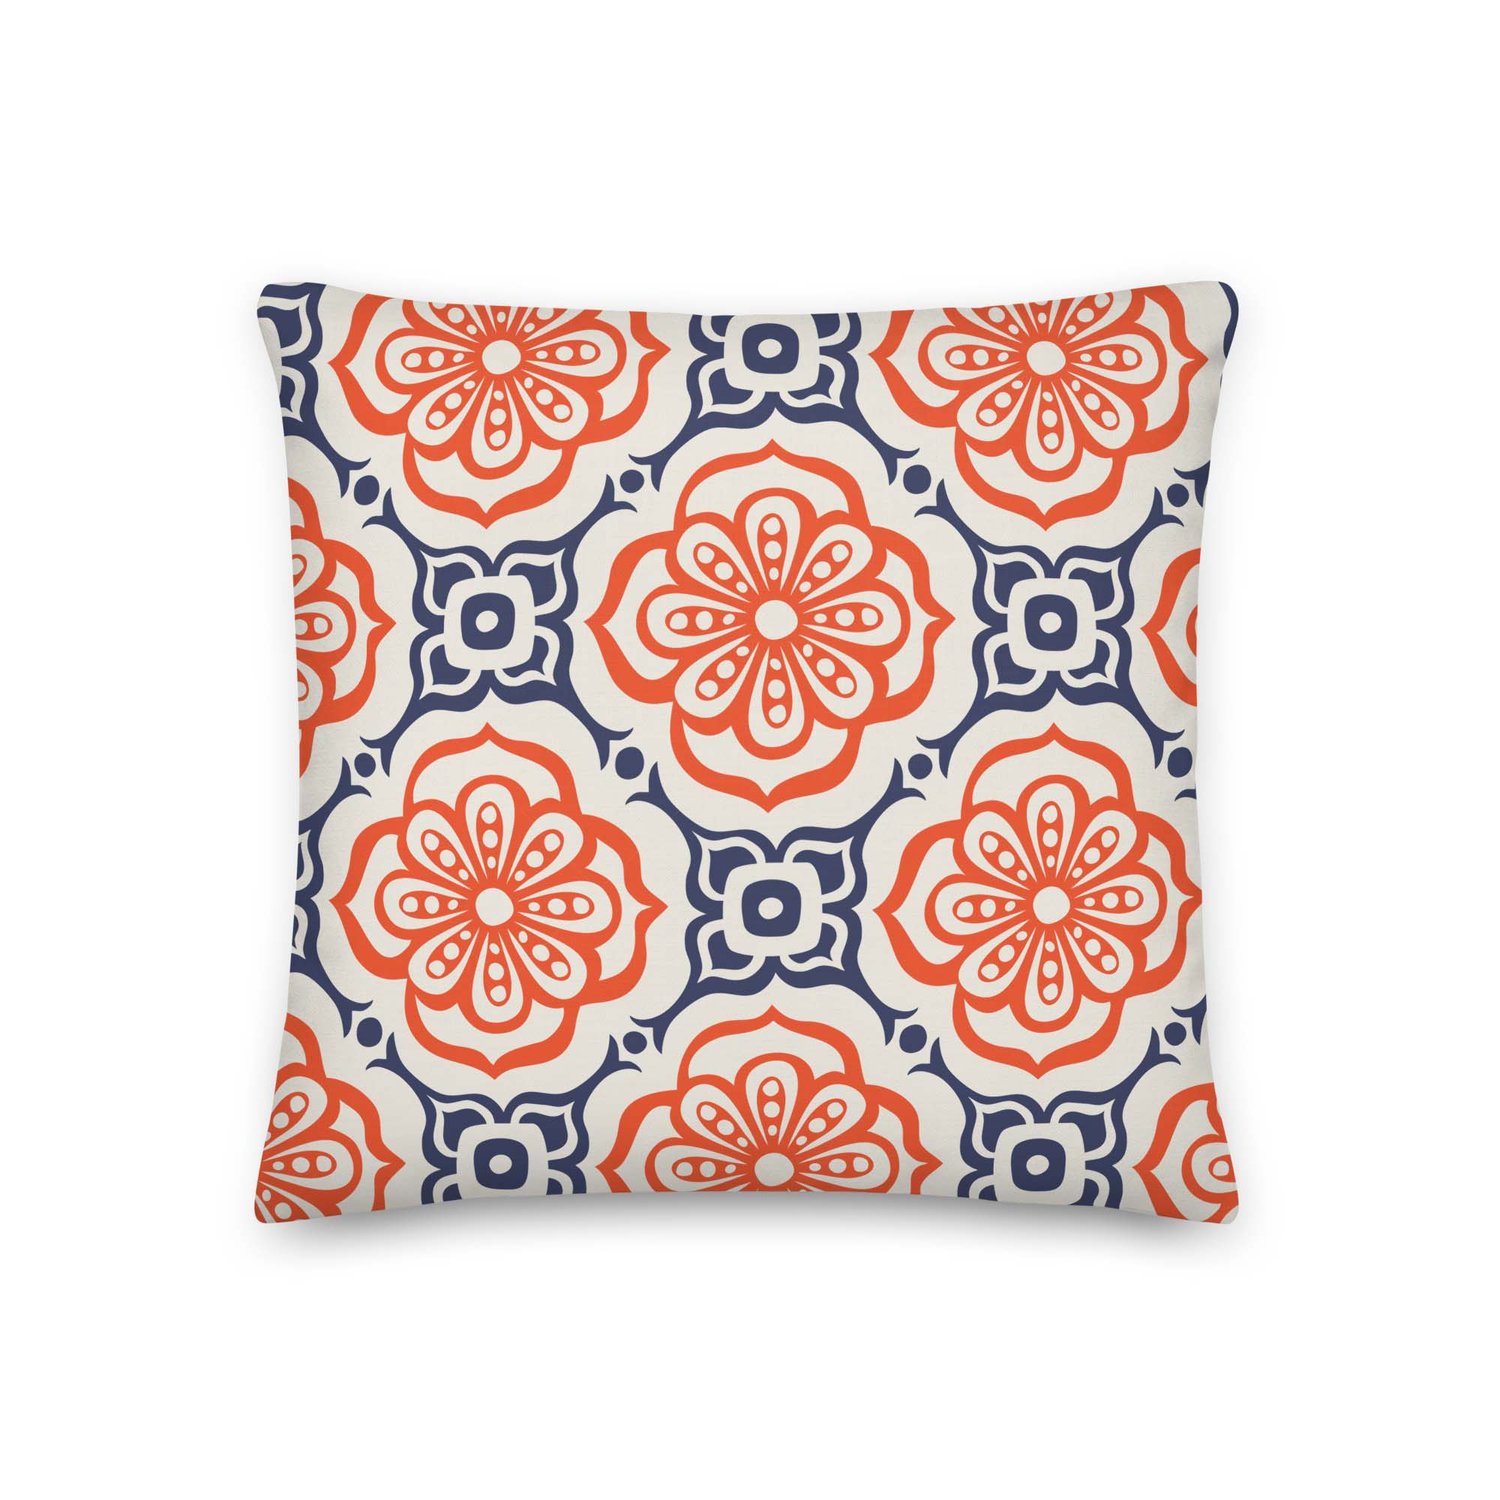 KD Spain — Colorful Alhambra Spanish Tile Design Throw Pillow Accent Decor